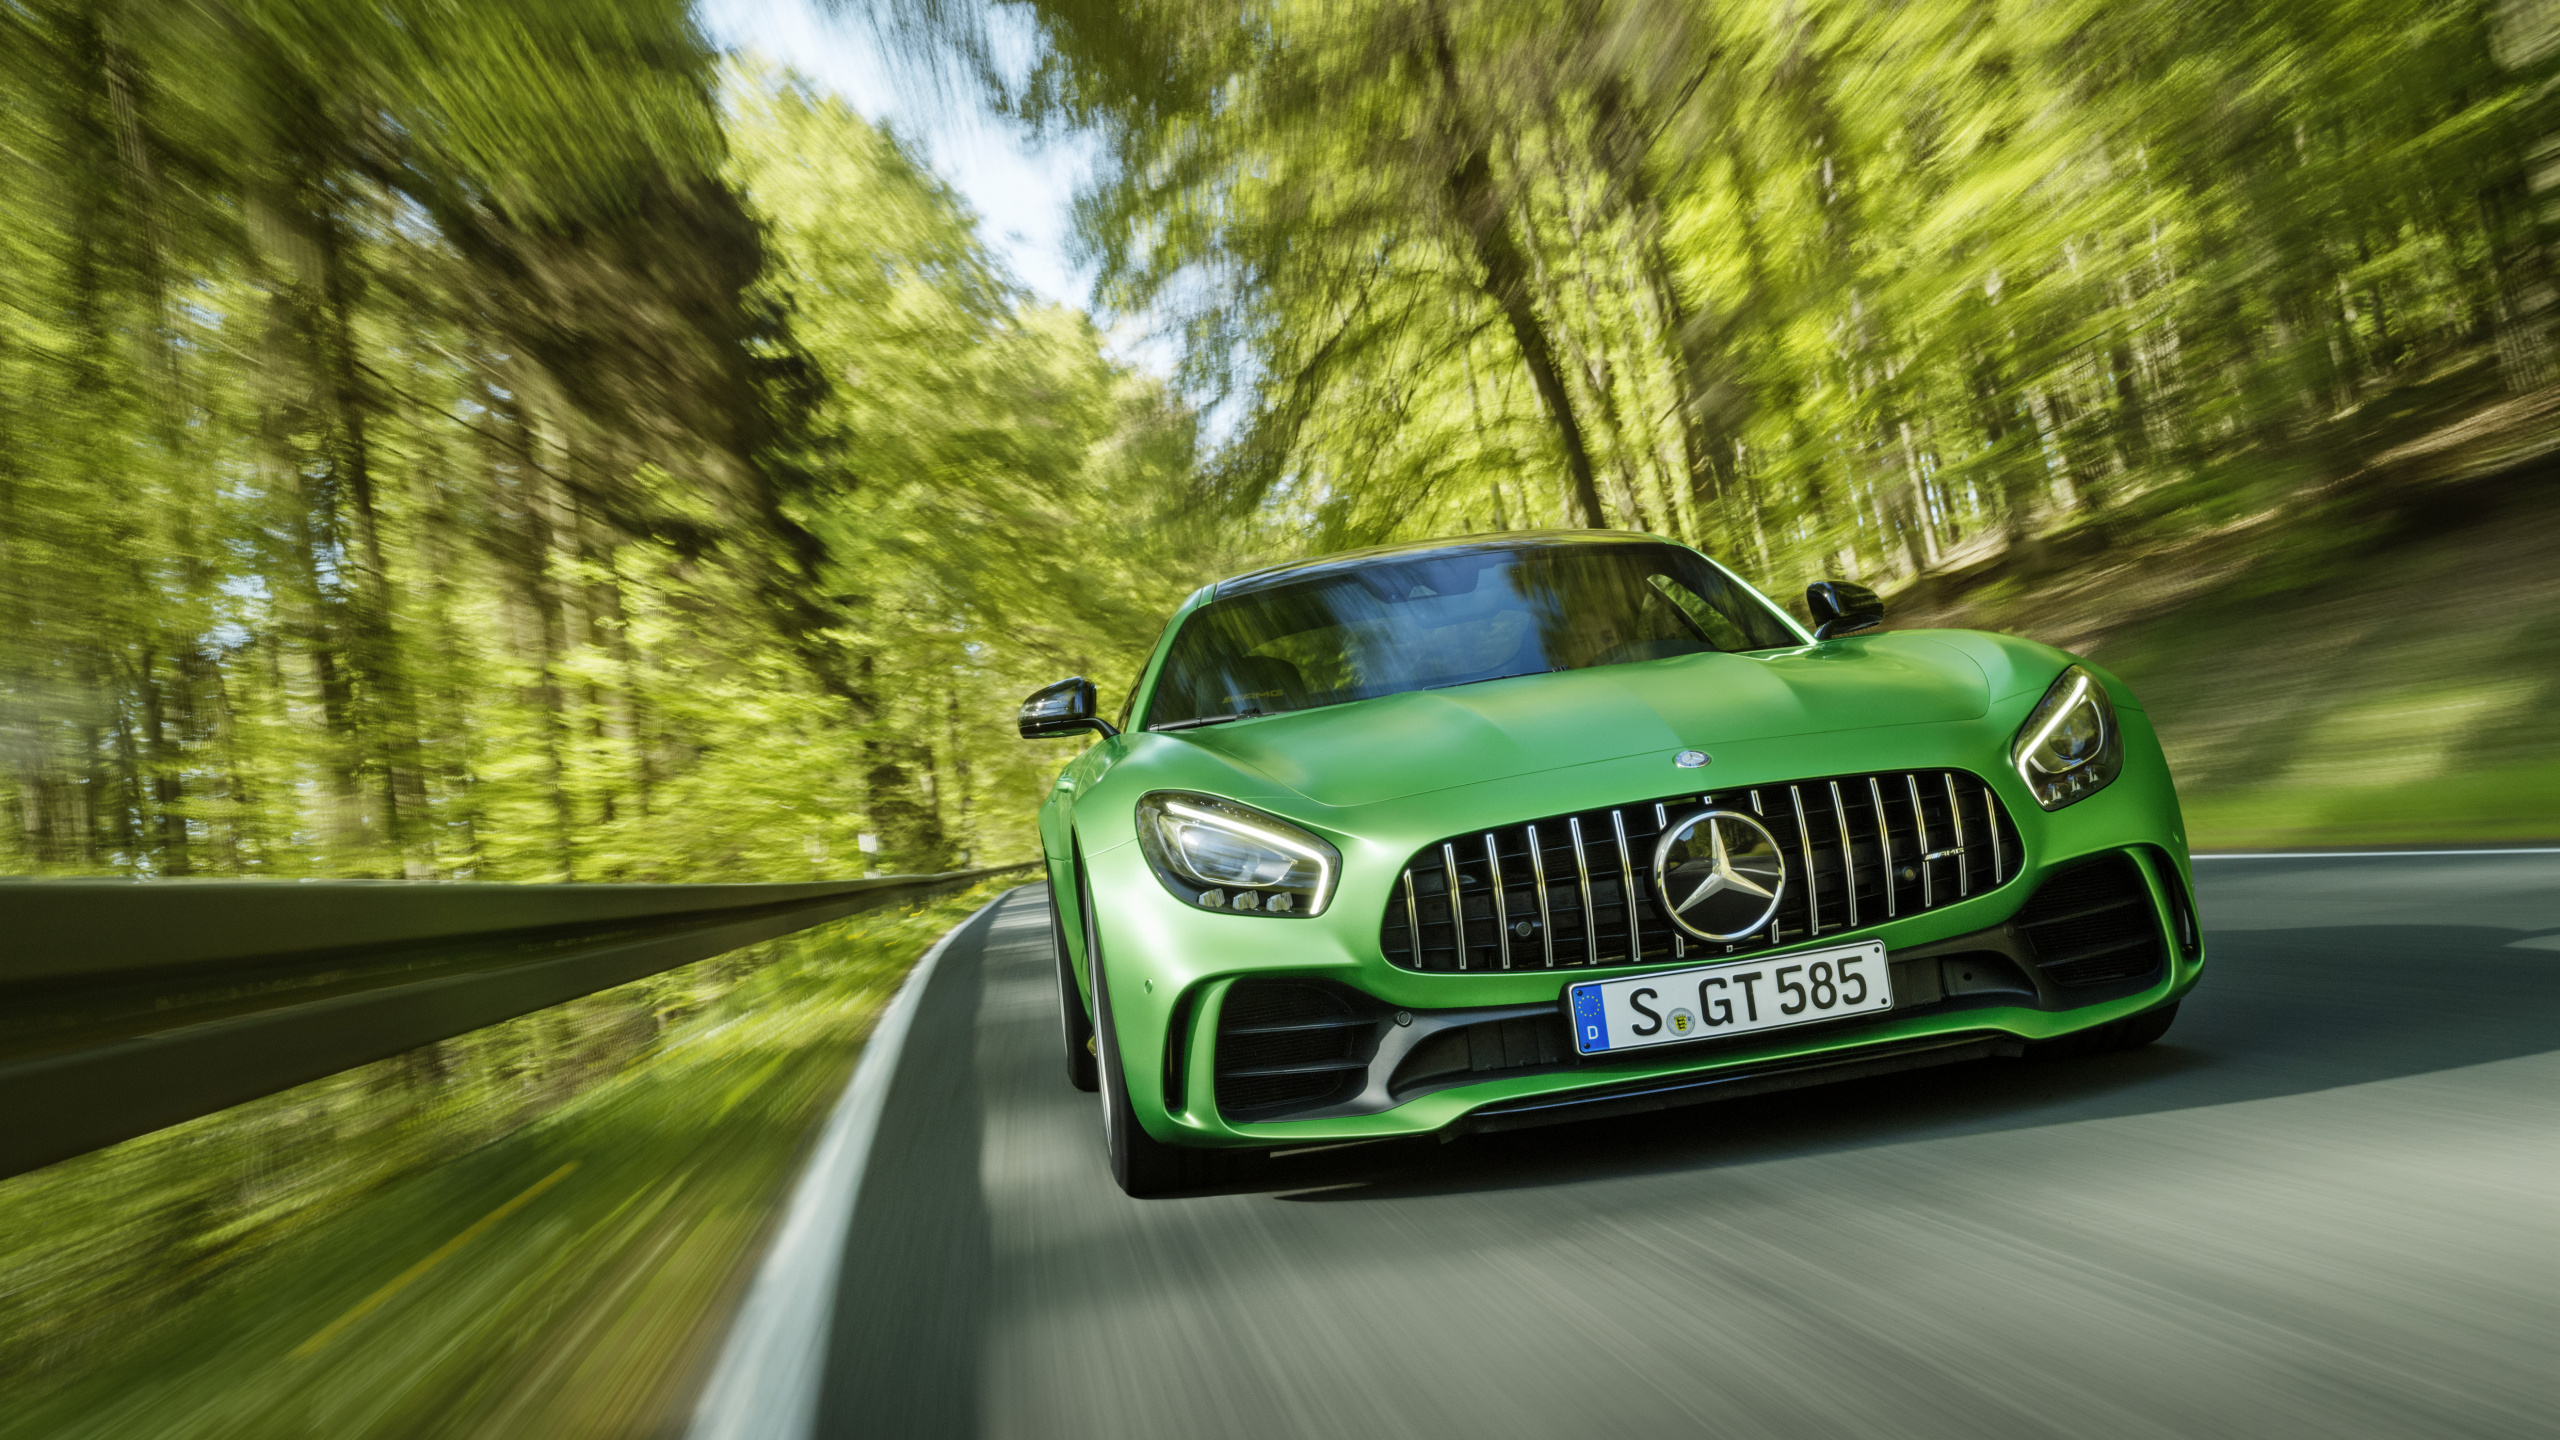 Green Mercedes Benz Car on Road During Daytime. Wallpaper in 2560x1440 Resolution